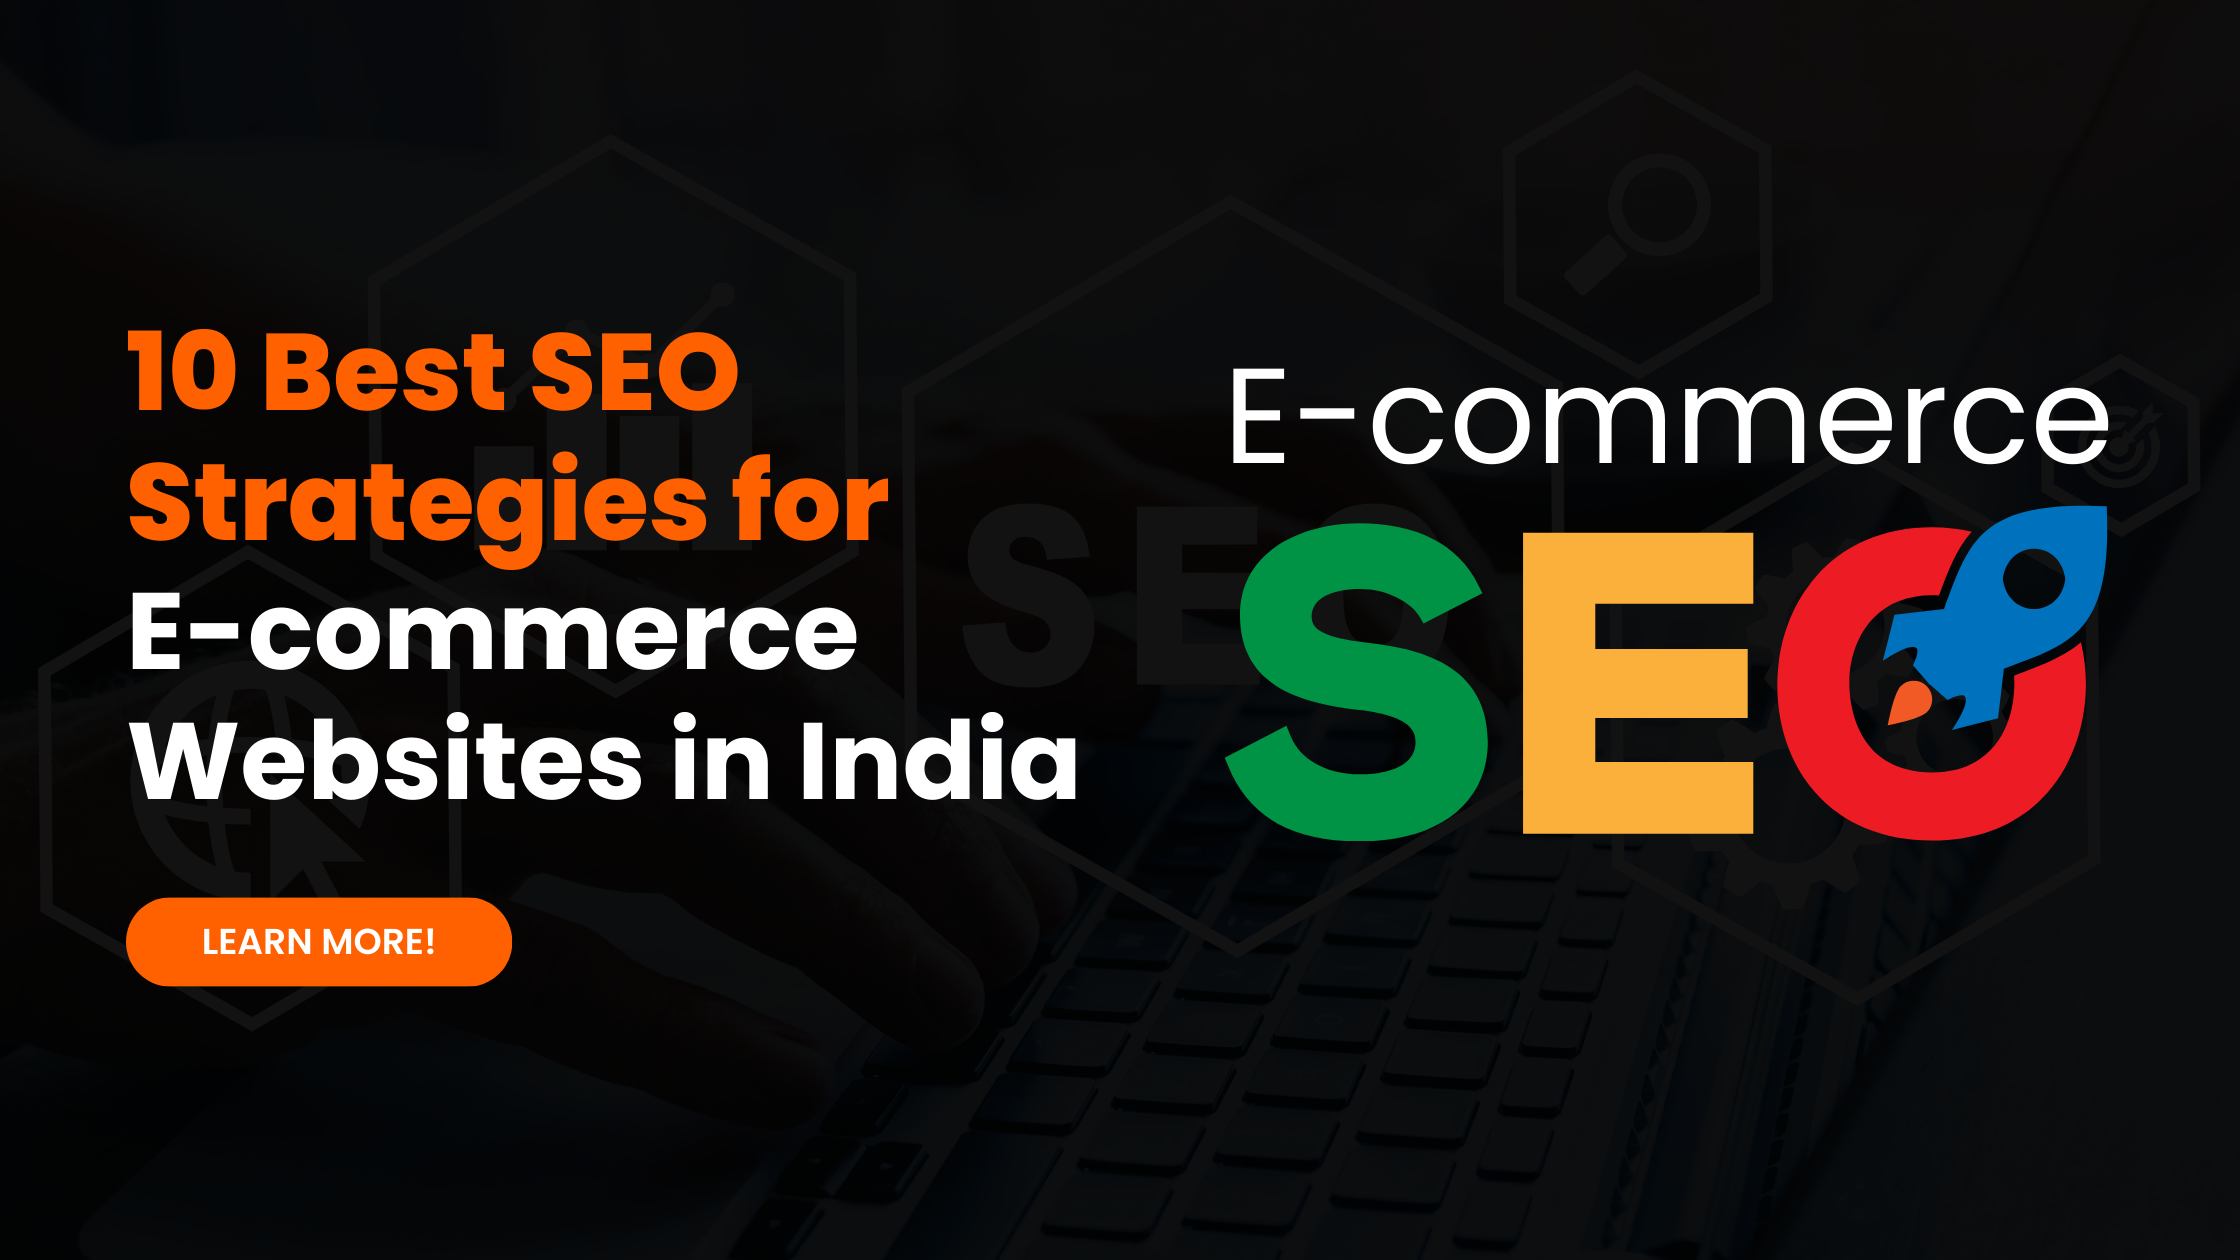 10 Best SEO Strategies for E-commerce Websites in India